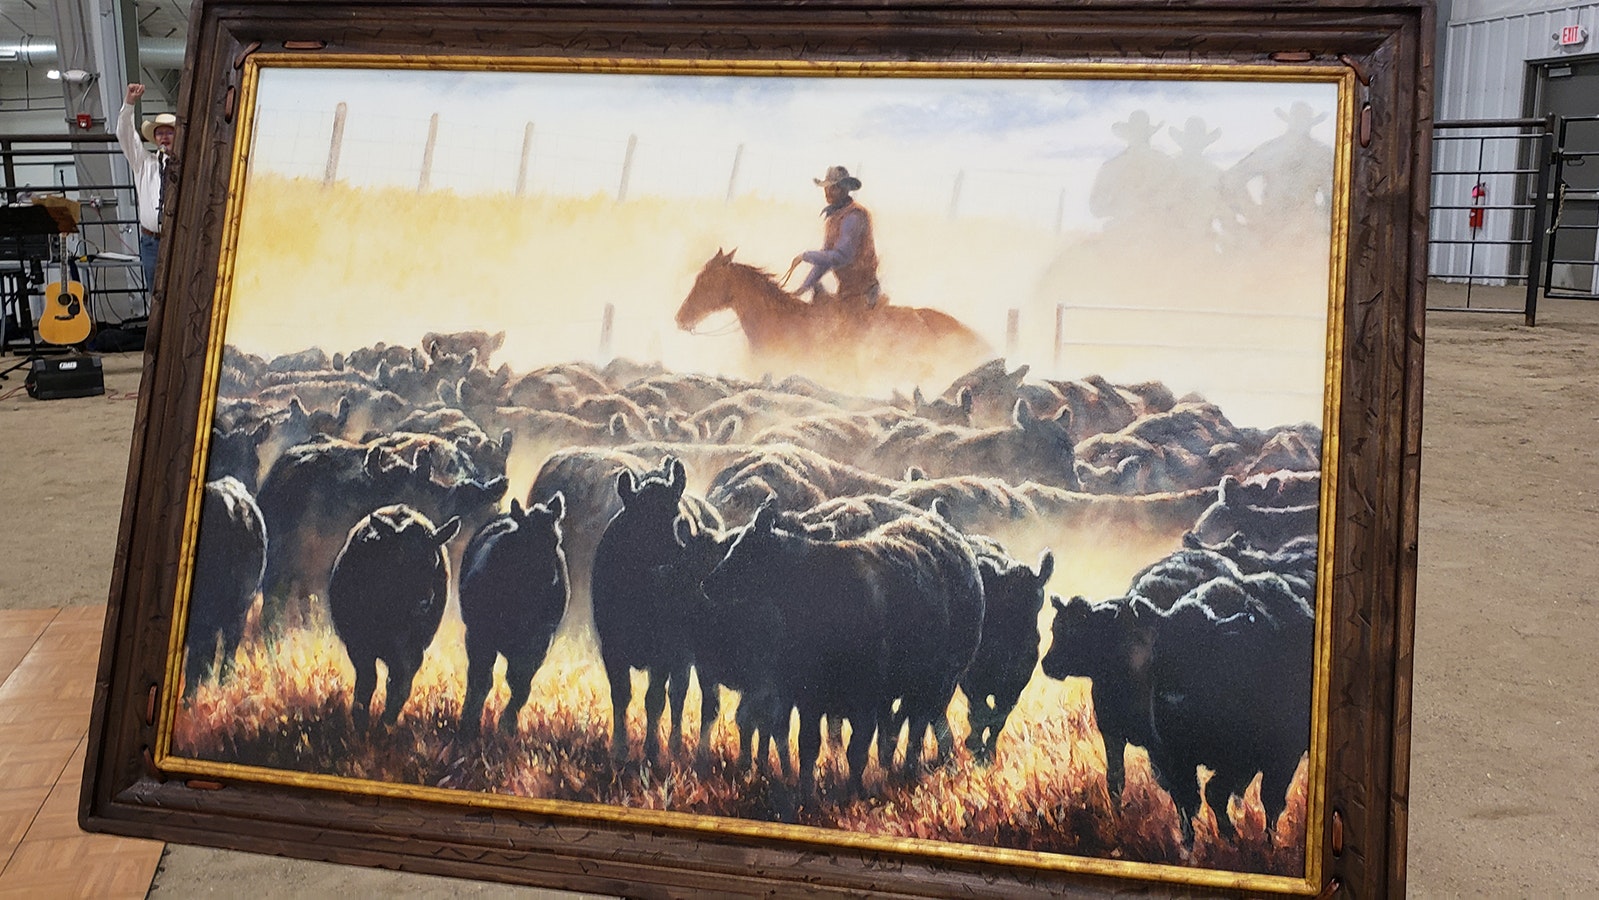 Every year there's a signature painting. Here's this year's by celebrity Judge PBS star and rancher Steve Boaldin.